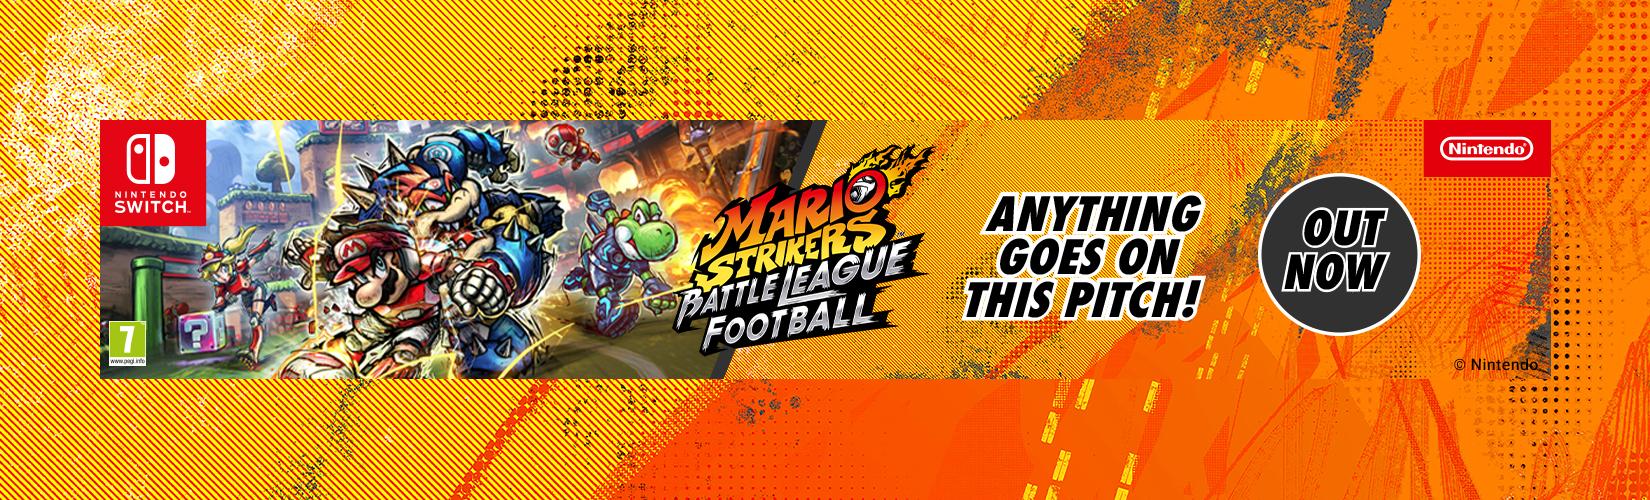 Mario Strikers Battle league Football. Anything goes on this pitch!